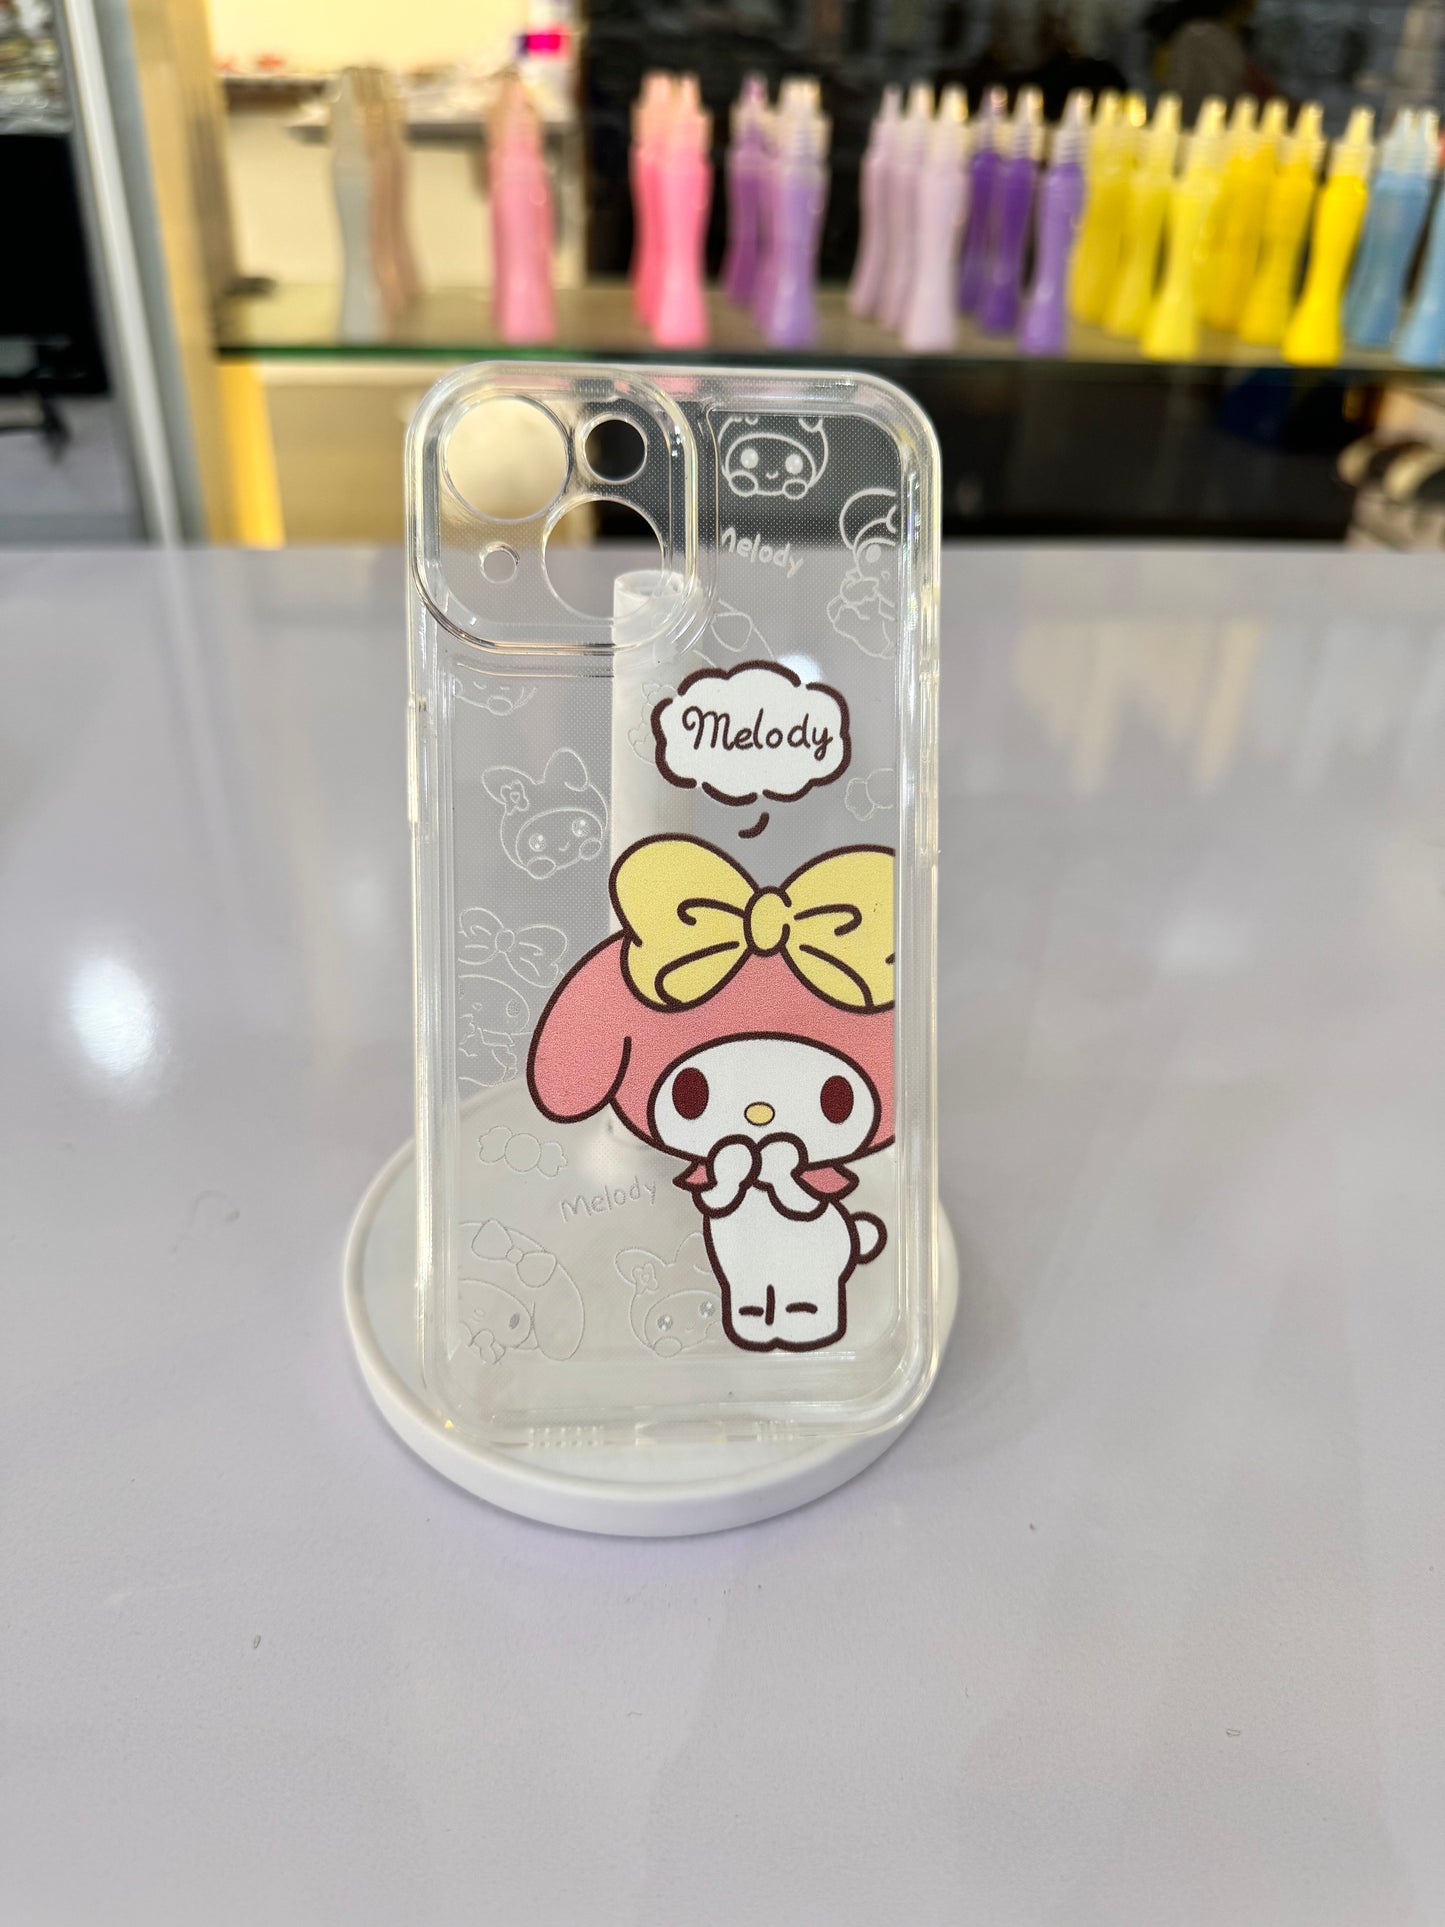 Melody Case for iPhones